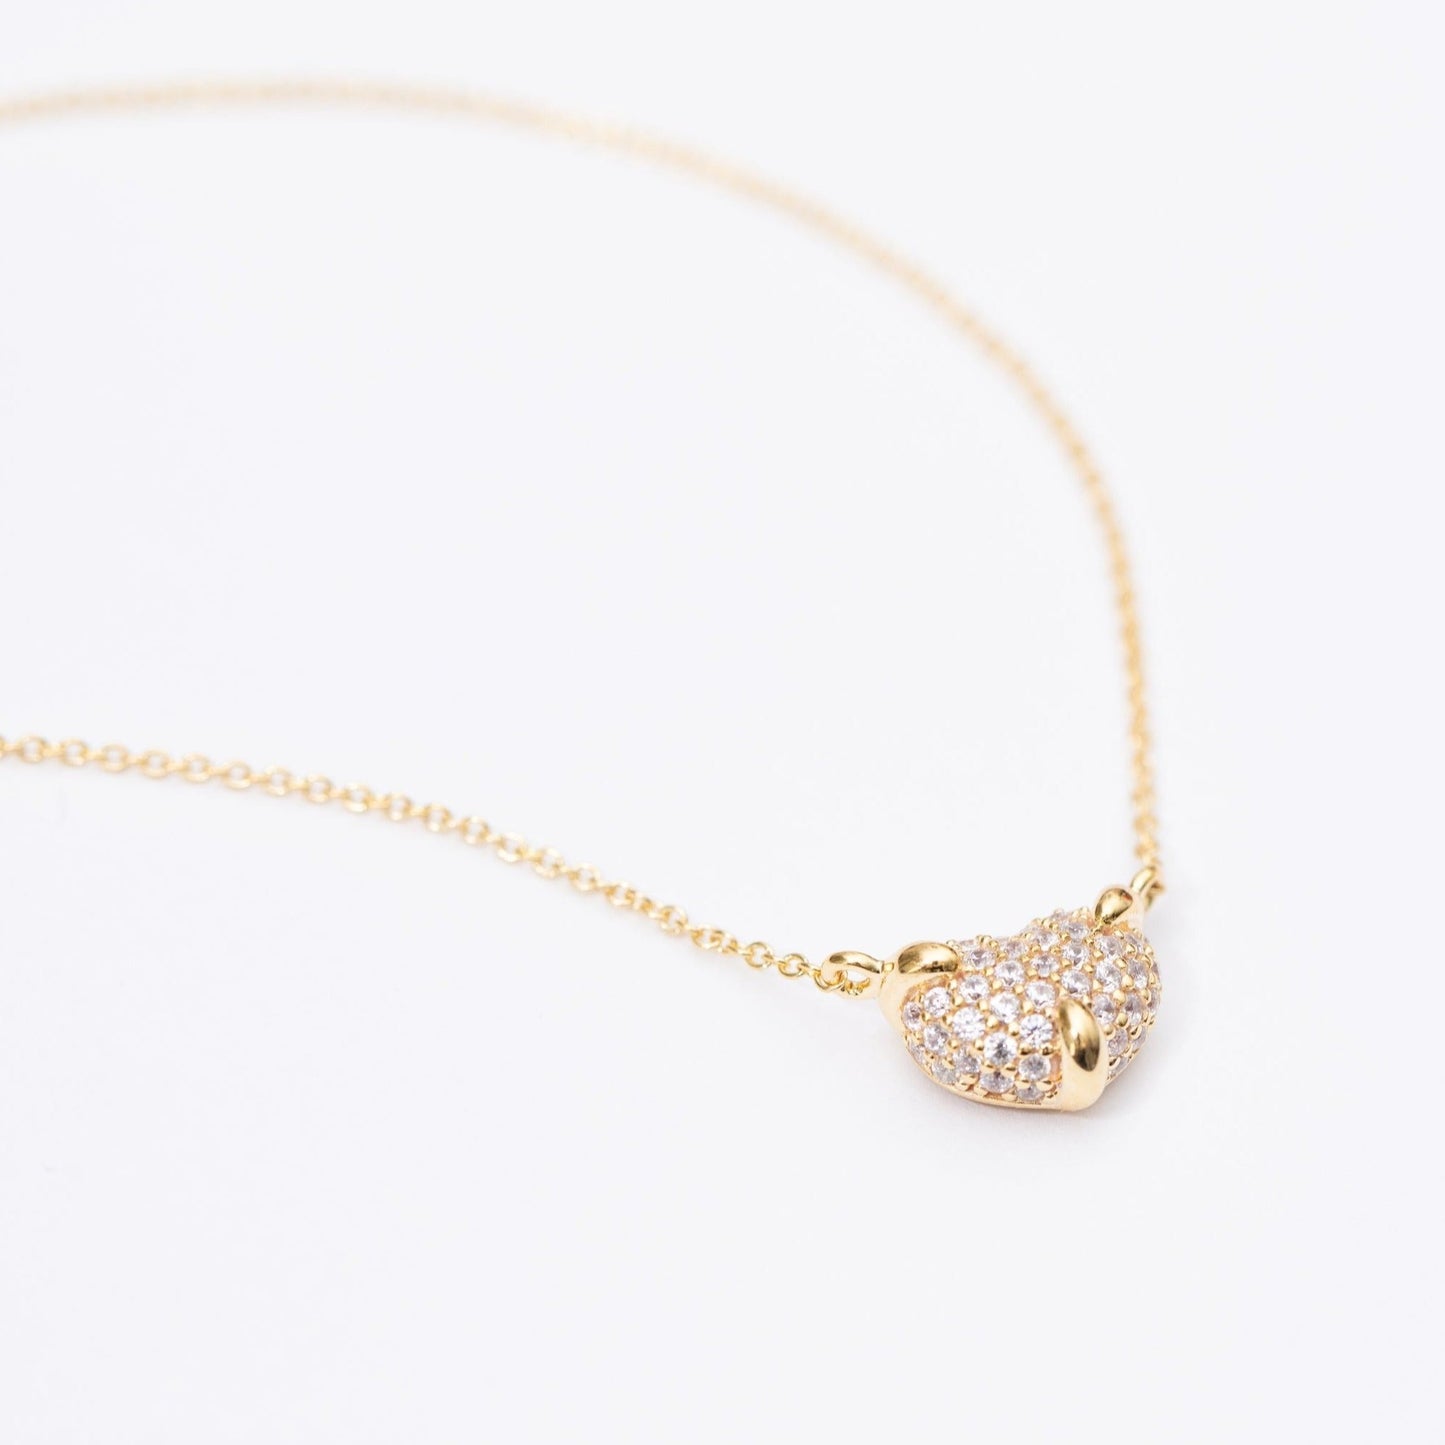 The Love Mama necklace - gold plated